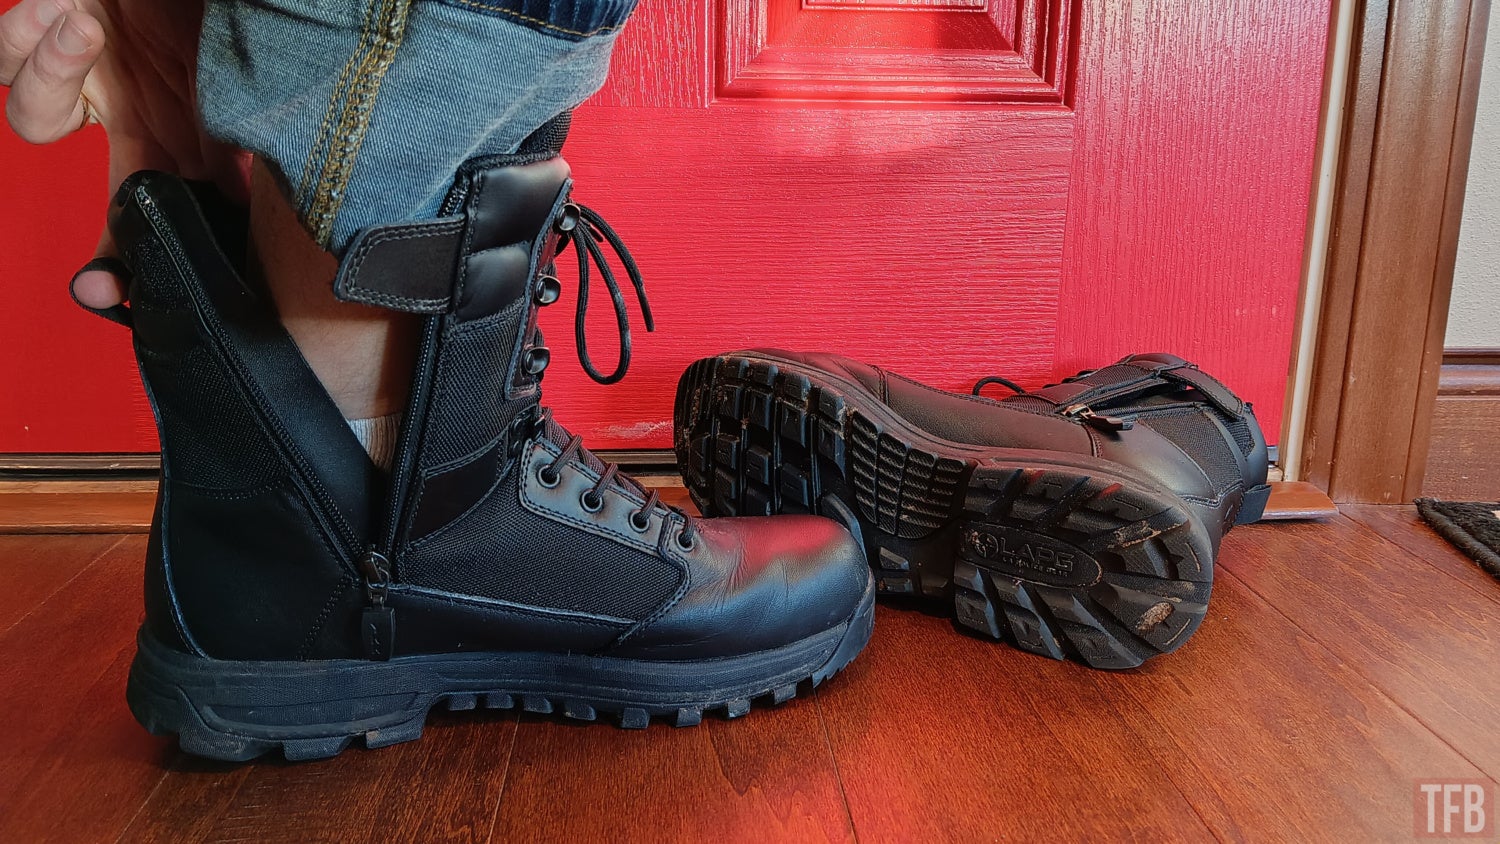 TFB Review: LA Police Gear Sector Side Zip Boots | Ban These